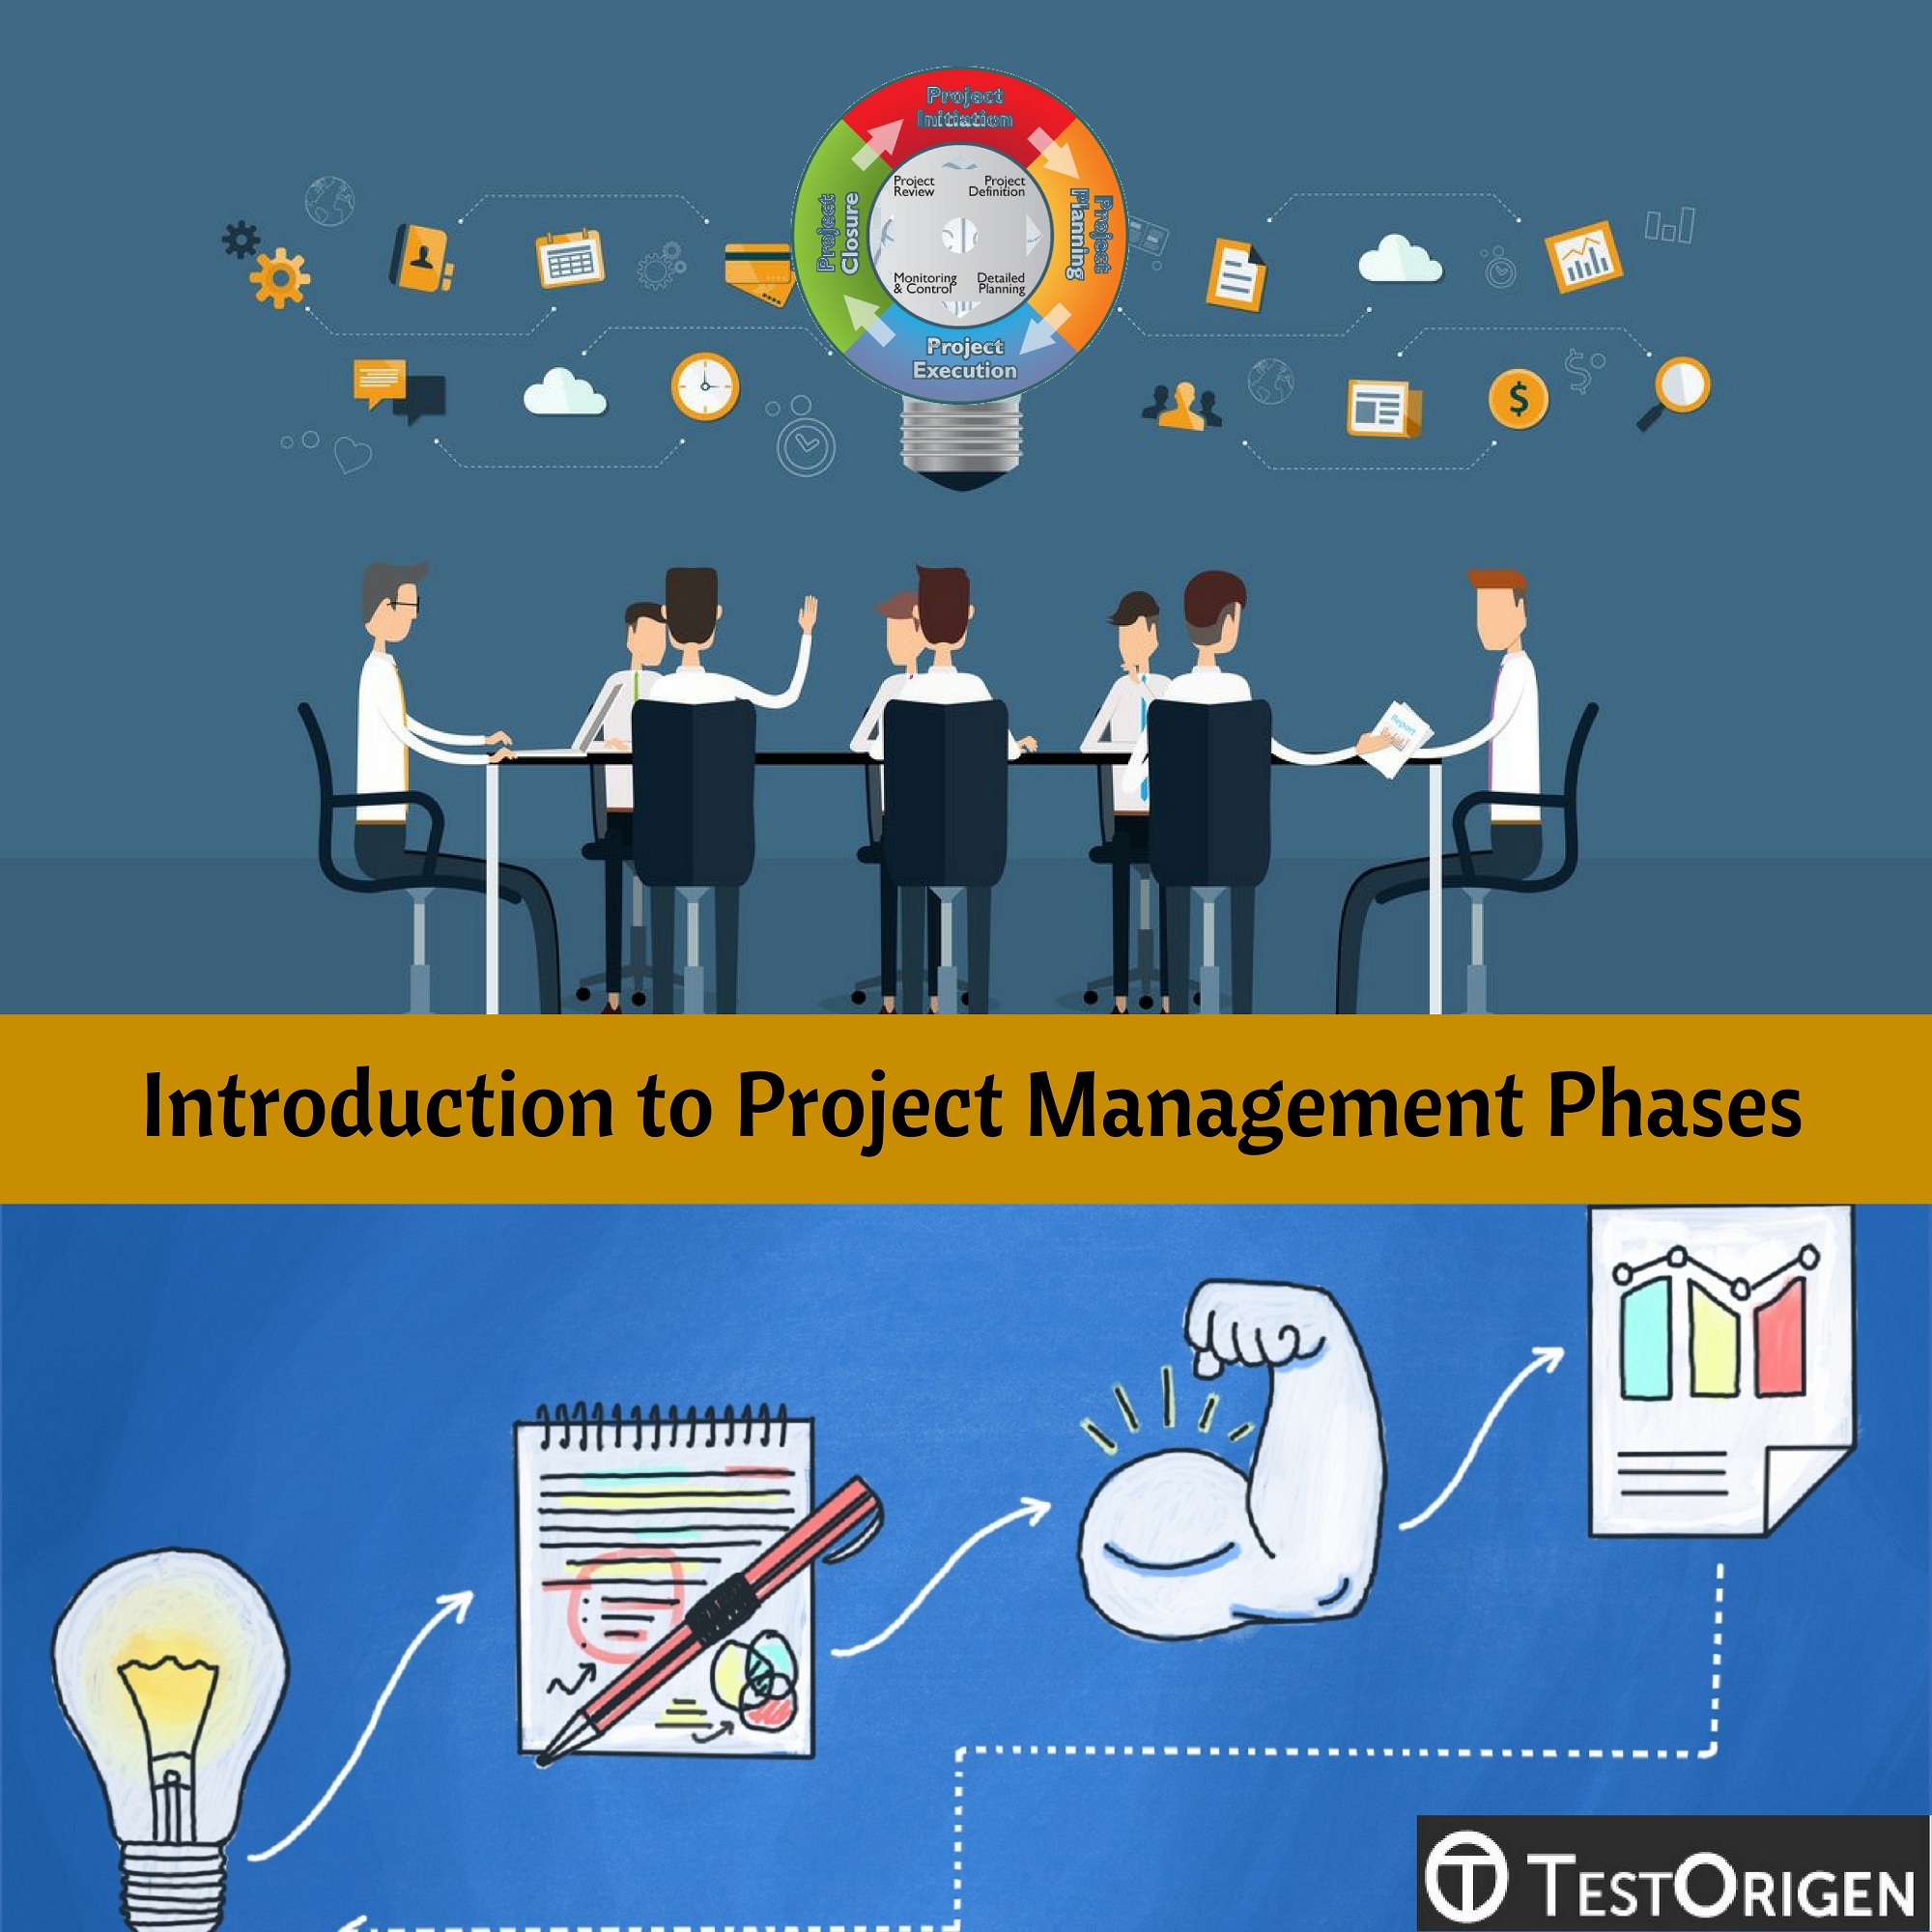 project introduction images